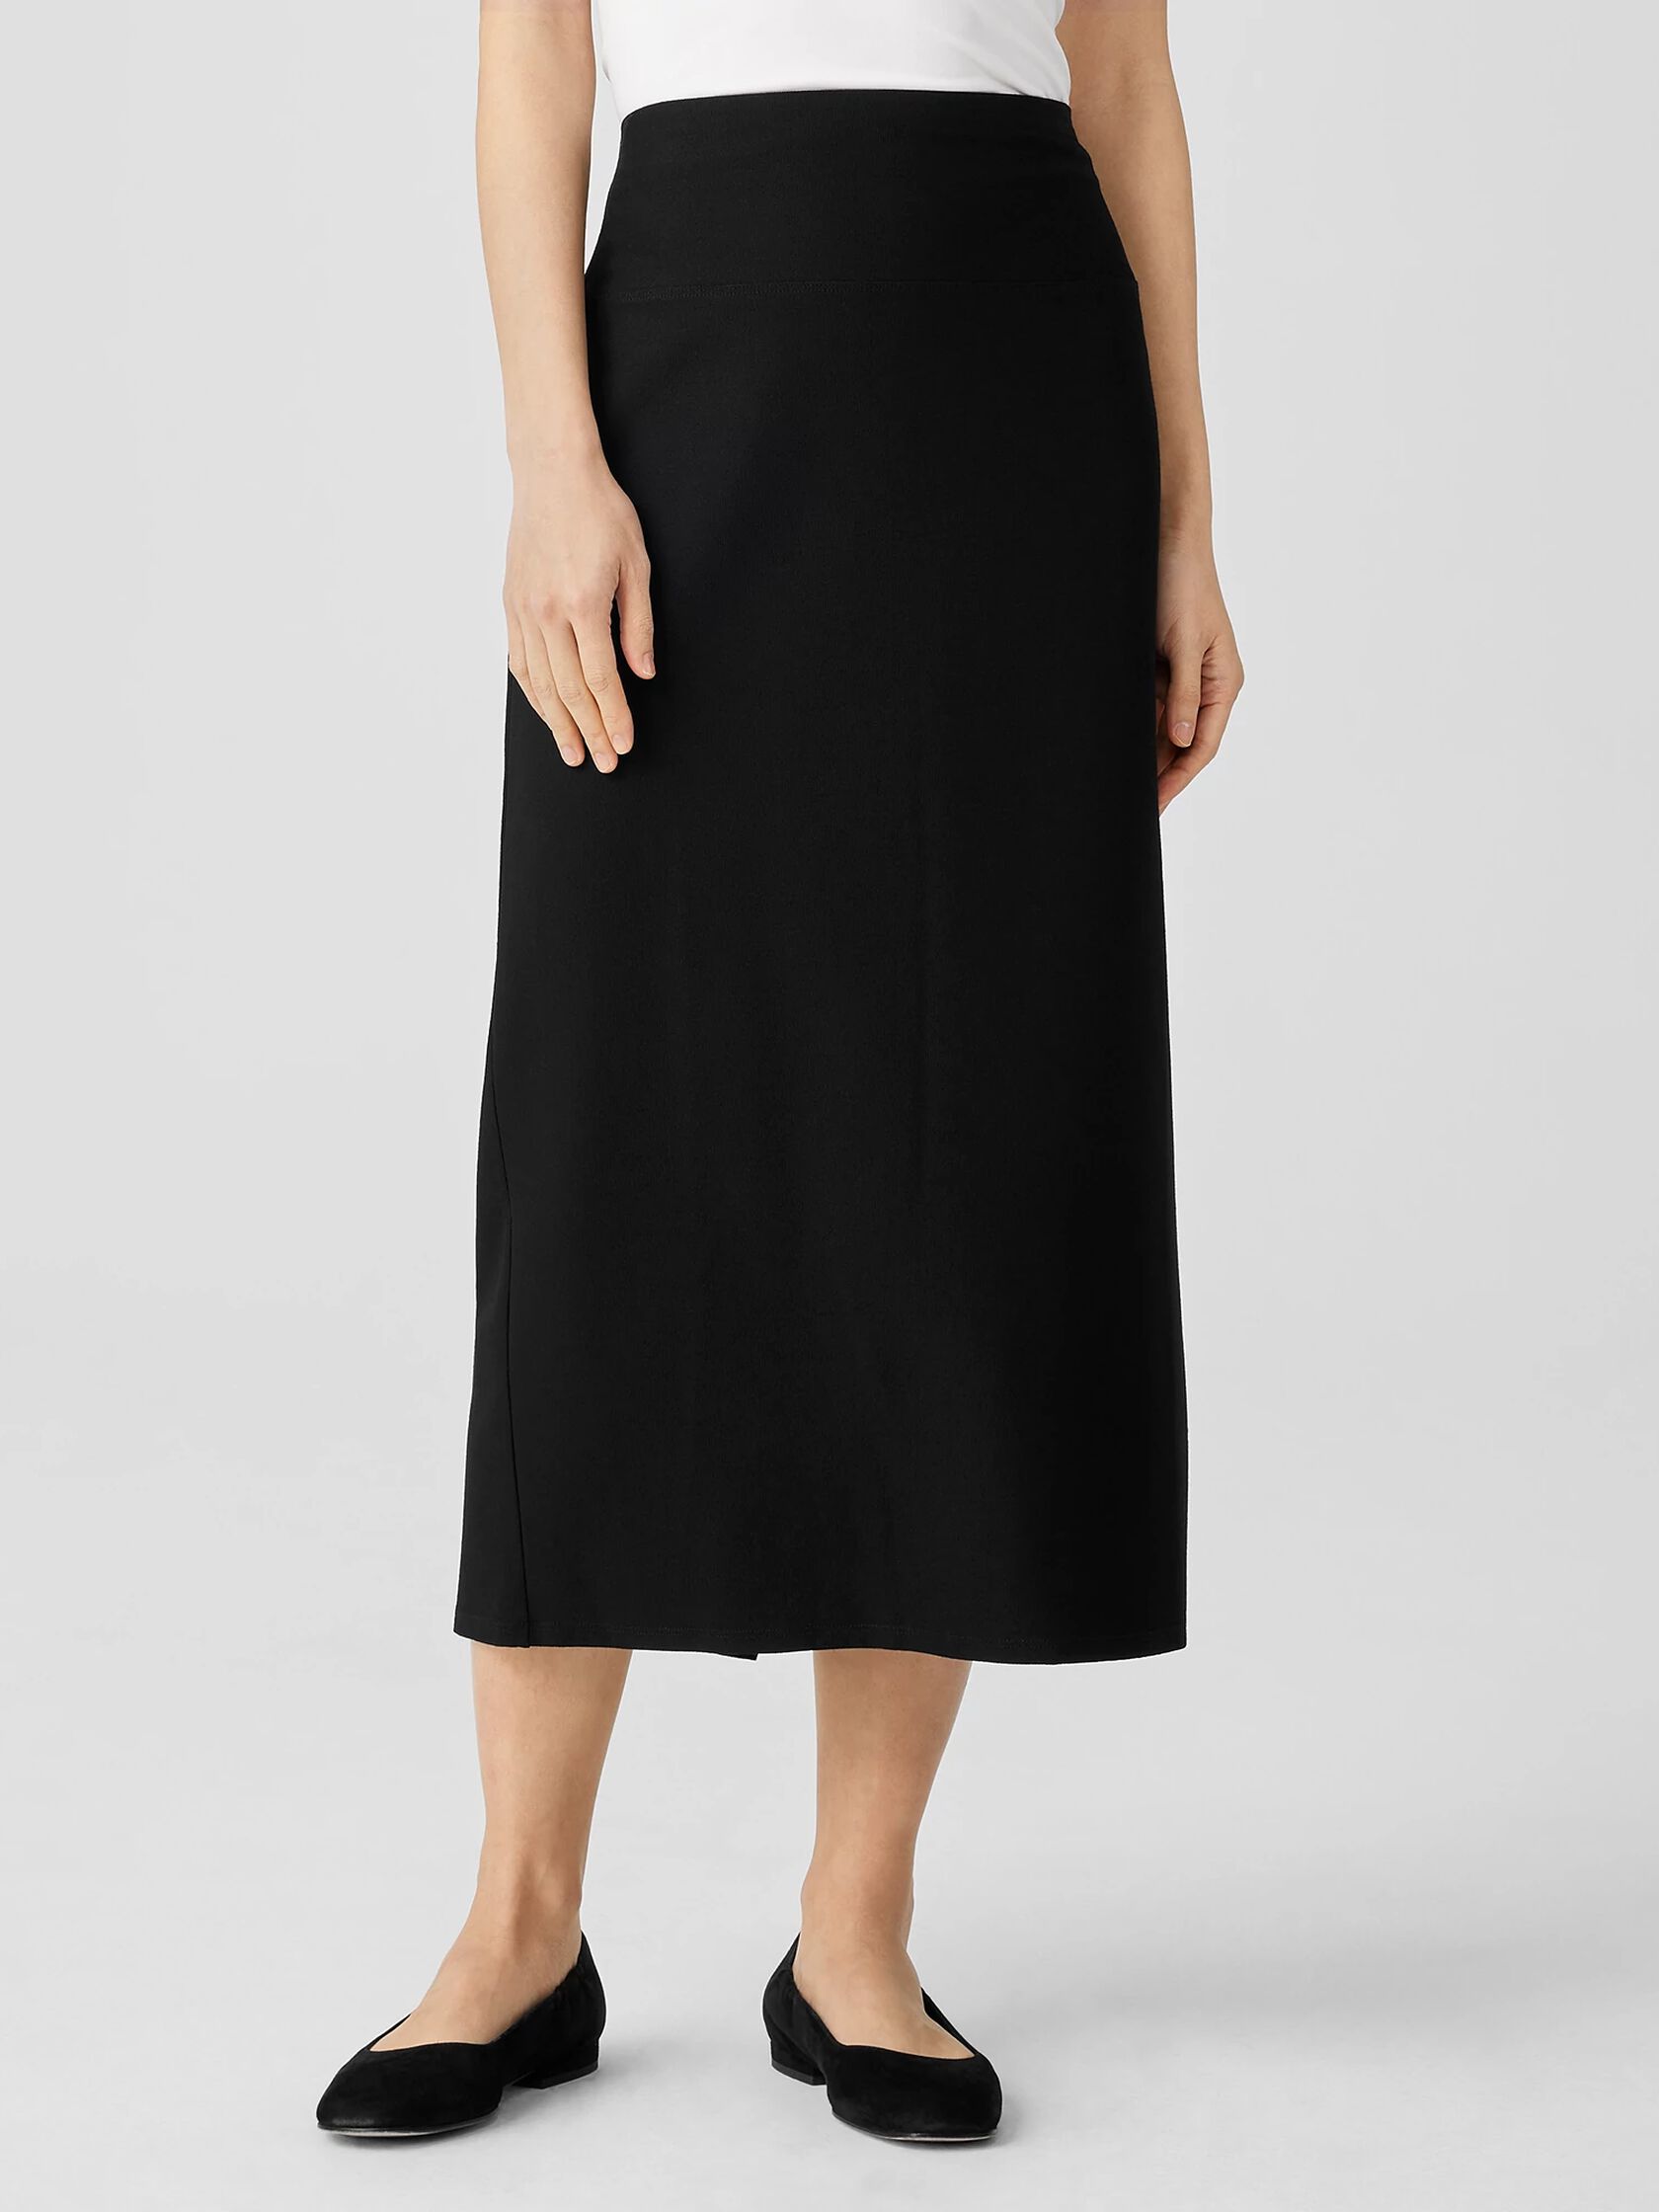 Washable Stretch Crepe Pencil Skirt | EILEEN FISHER